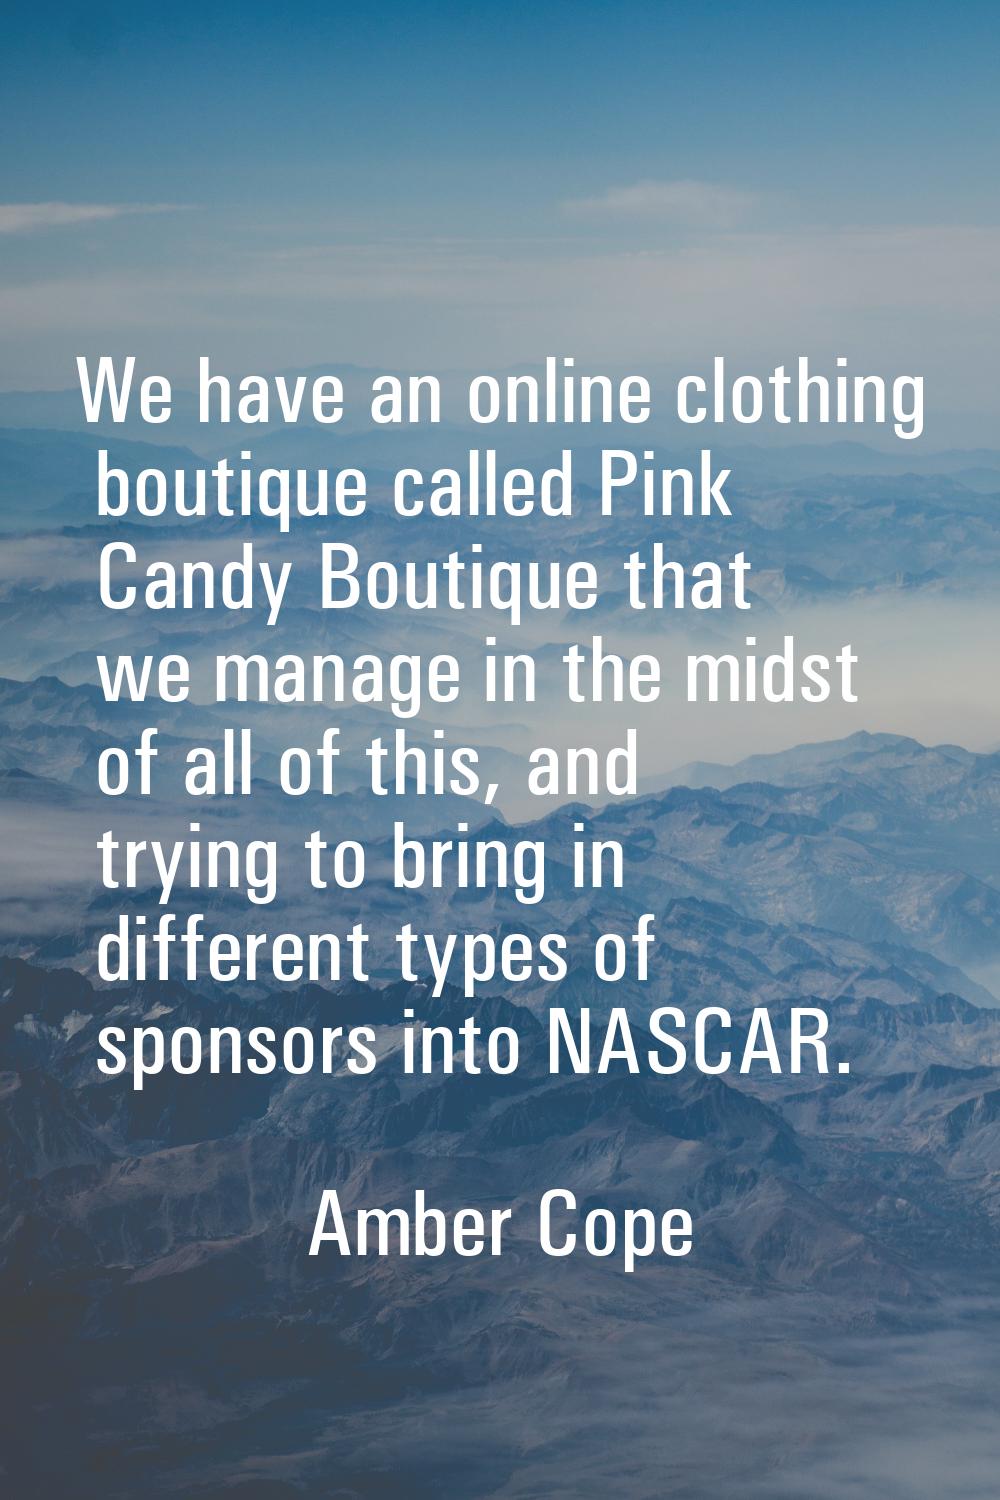 We have an online clothing boutique called Pink Candy Boutique that we manage in the midst of all o